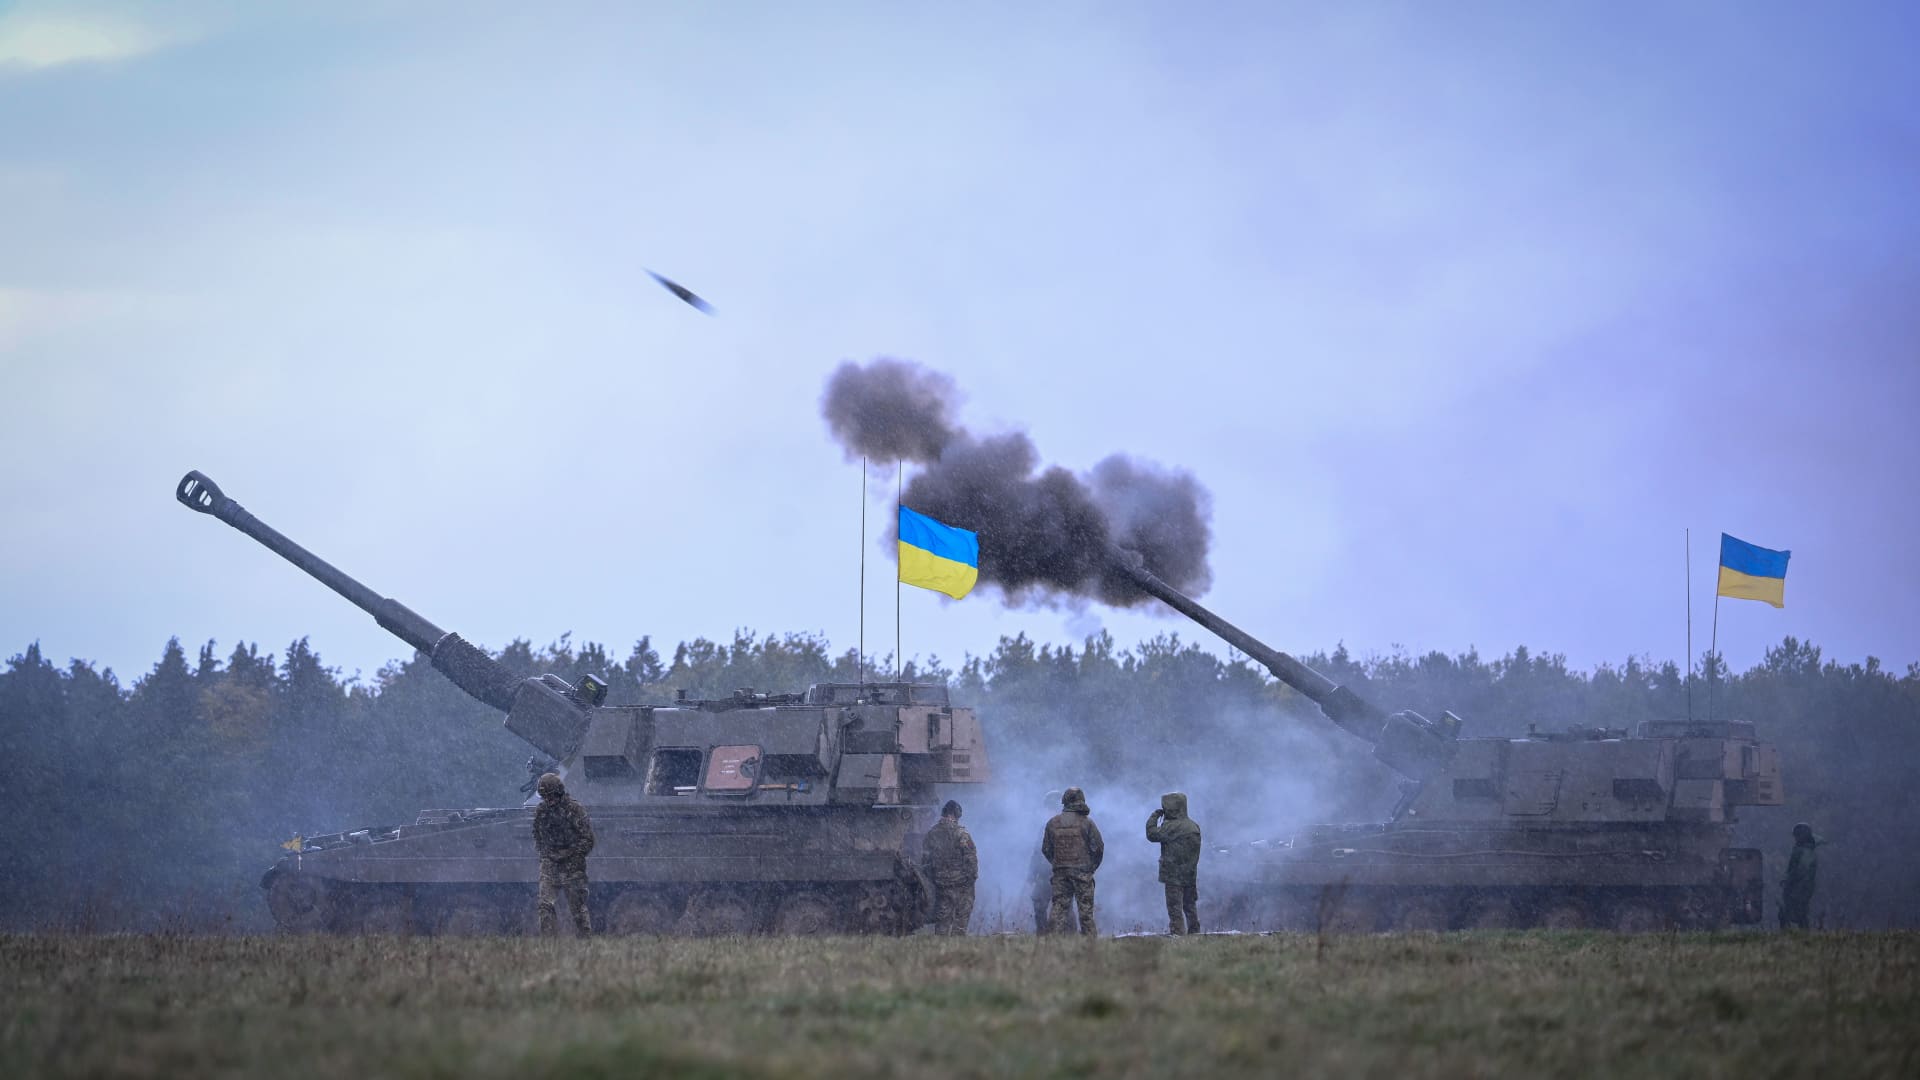 Ukrainian troops live fire the AS90 during their final training, on March 24, 2023 in South West, England. Ukrainian artillery recruits come to the end of their training on AS90 155mm self-propelled gun. 